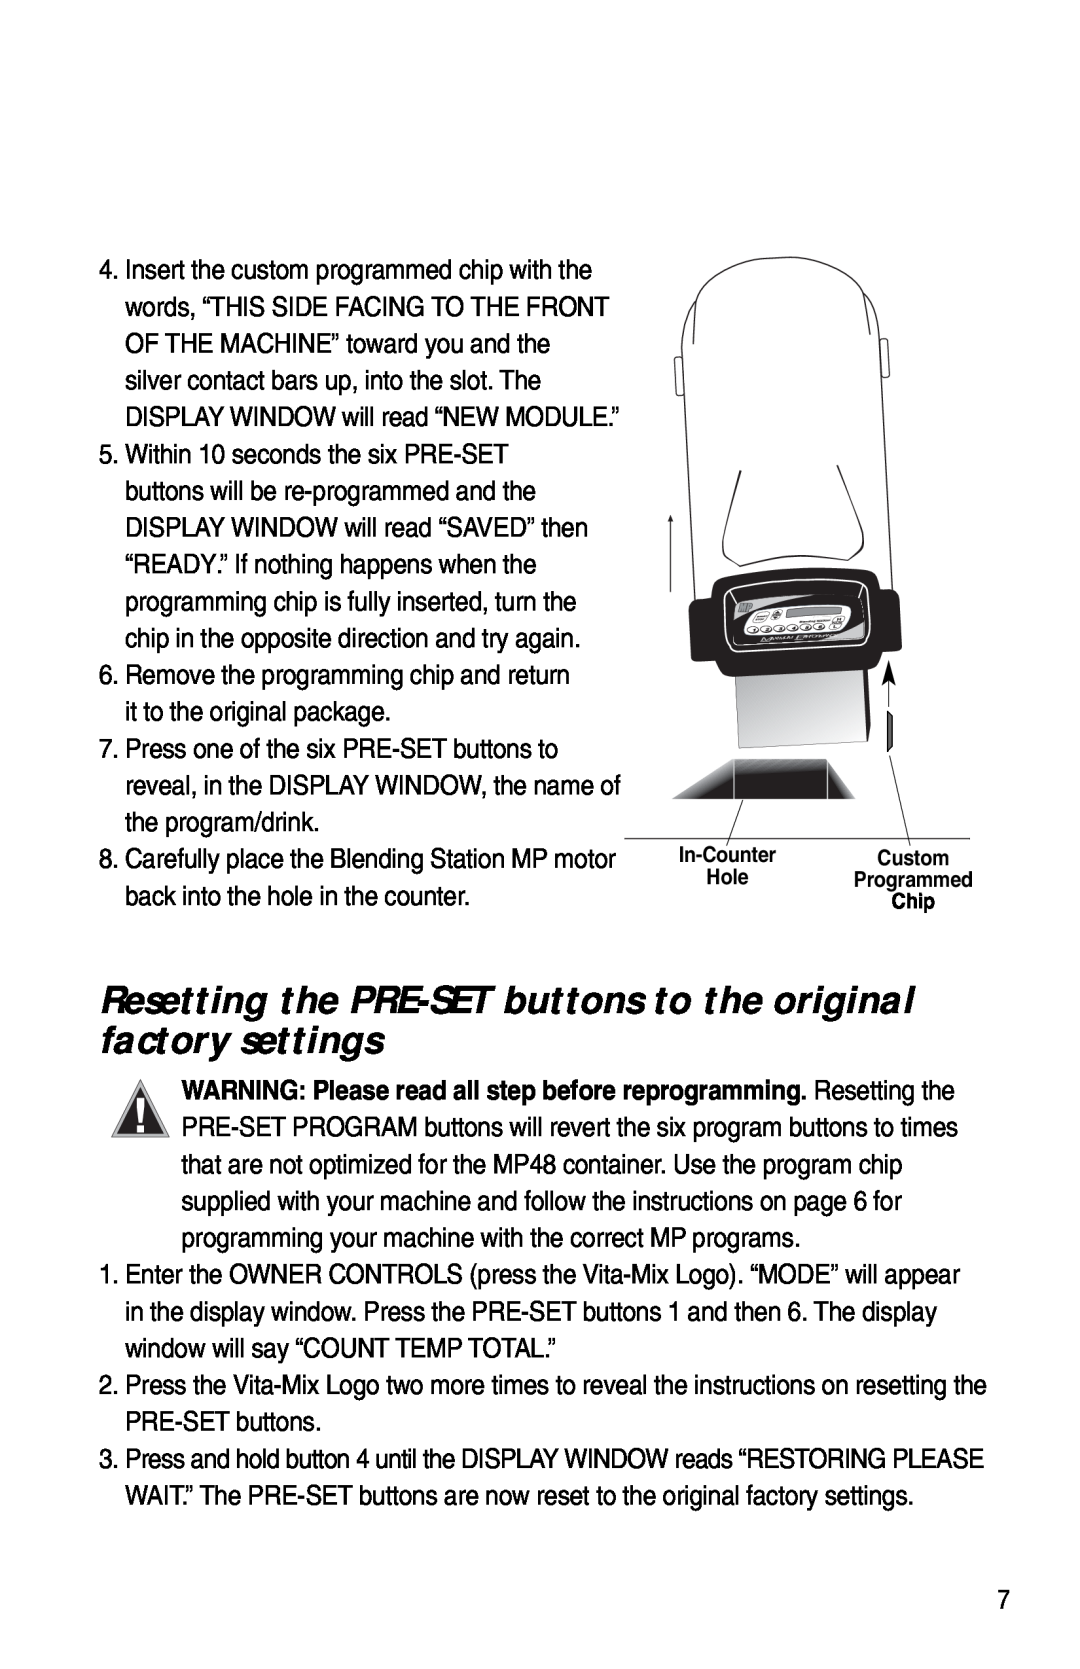 Vita-Mix XTG012 owner manual Remove the programming chip and return it to the original package 